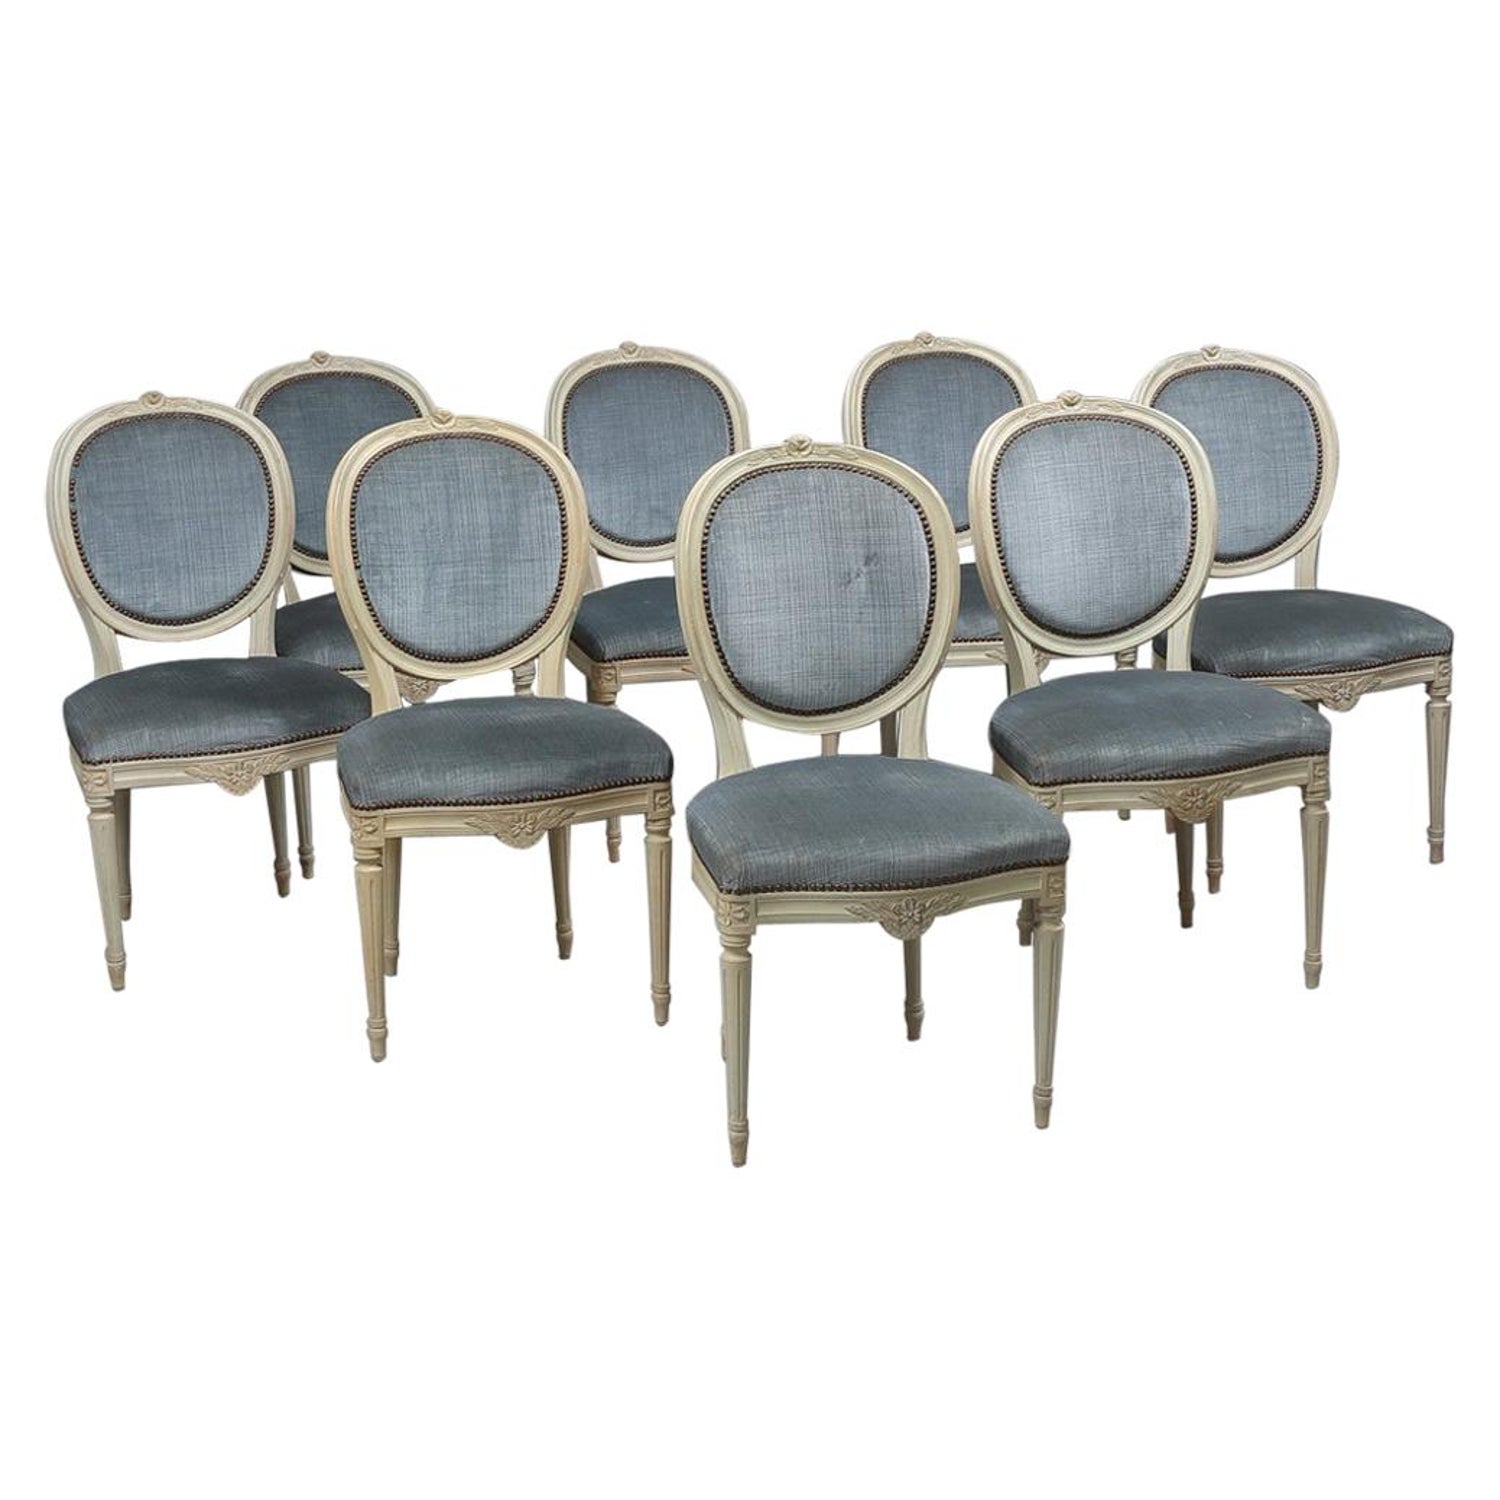 Swedish Gustavian Round Back, Round Back Dining Chairs Upholstered